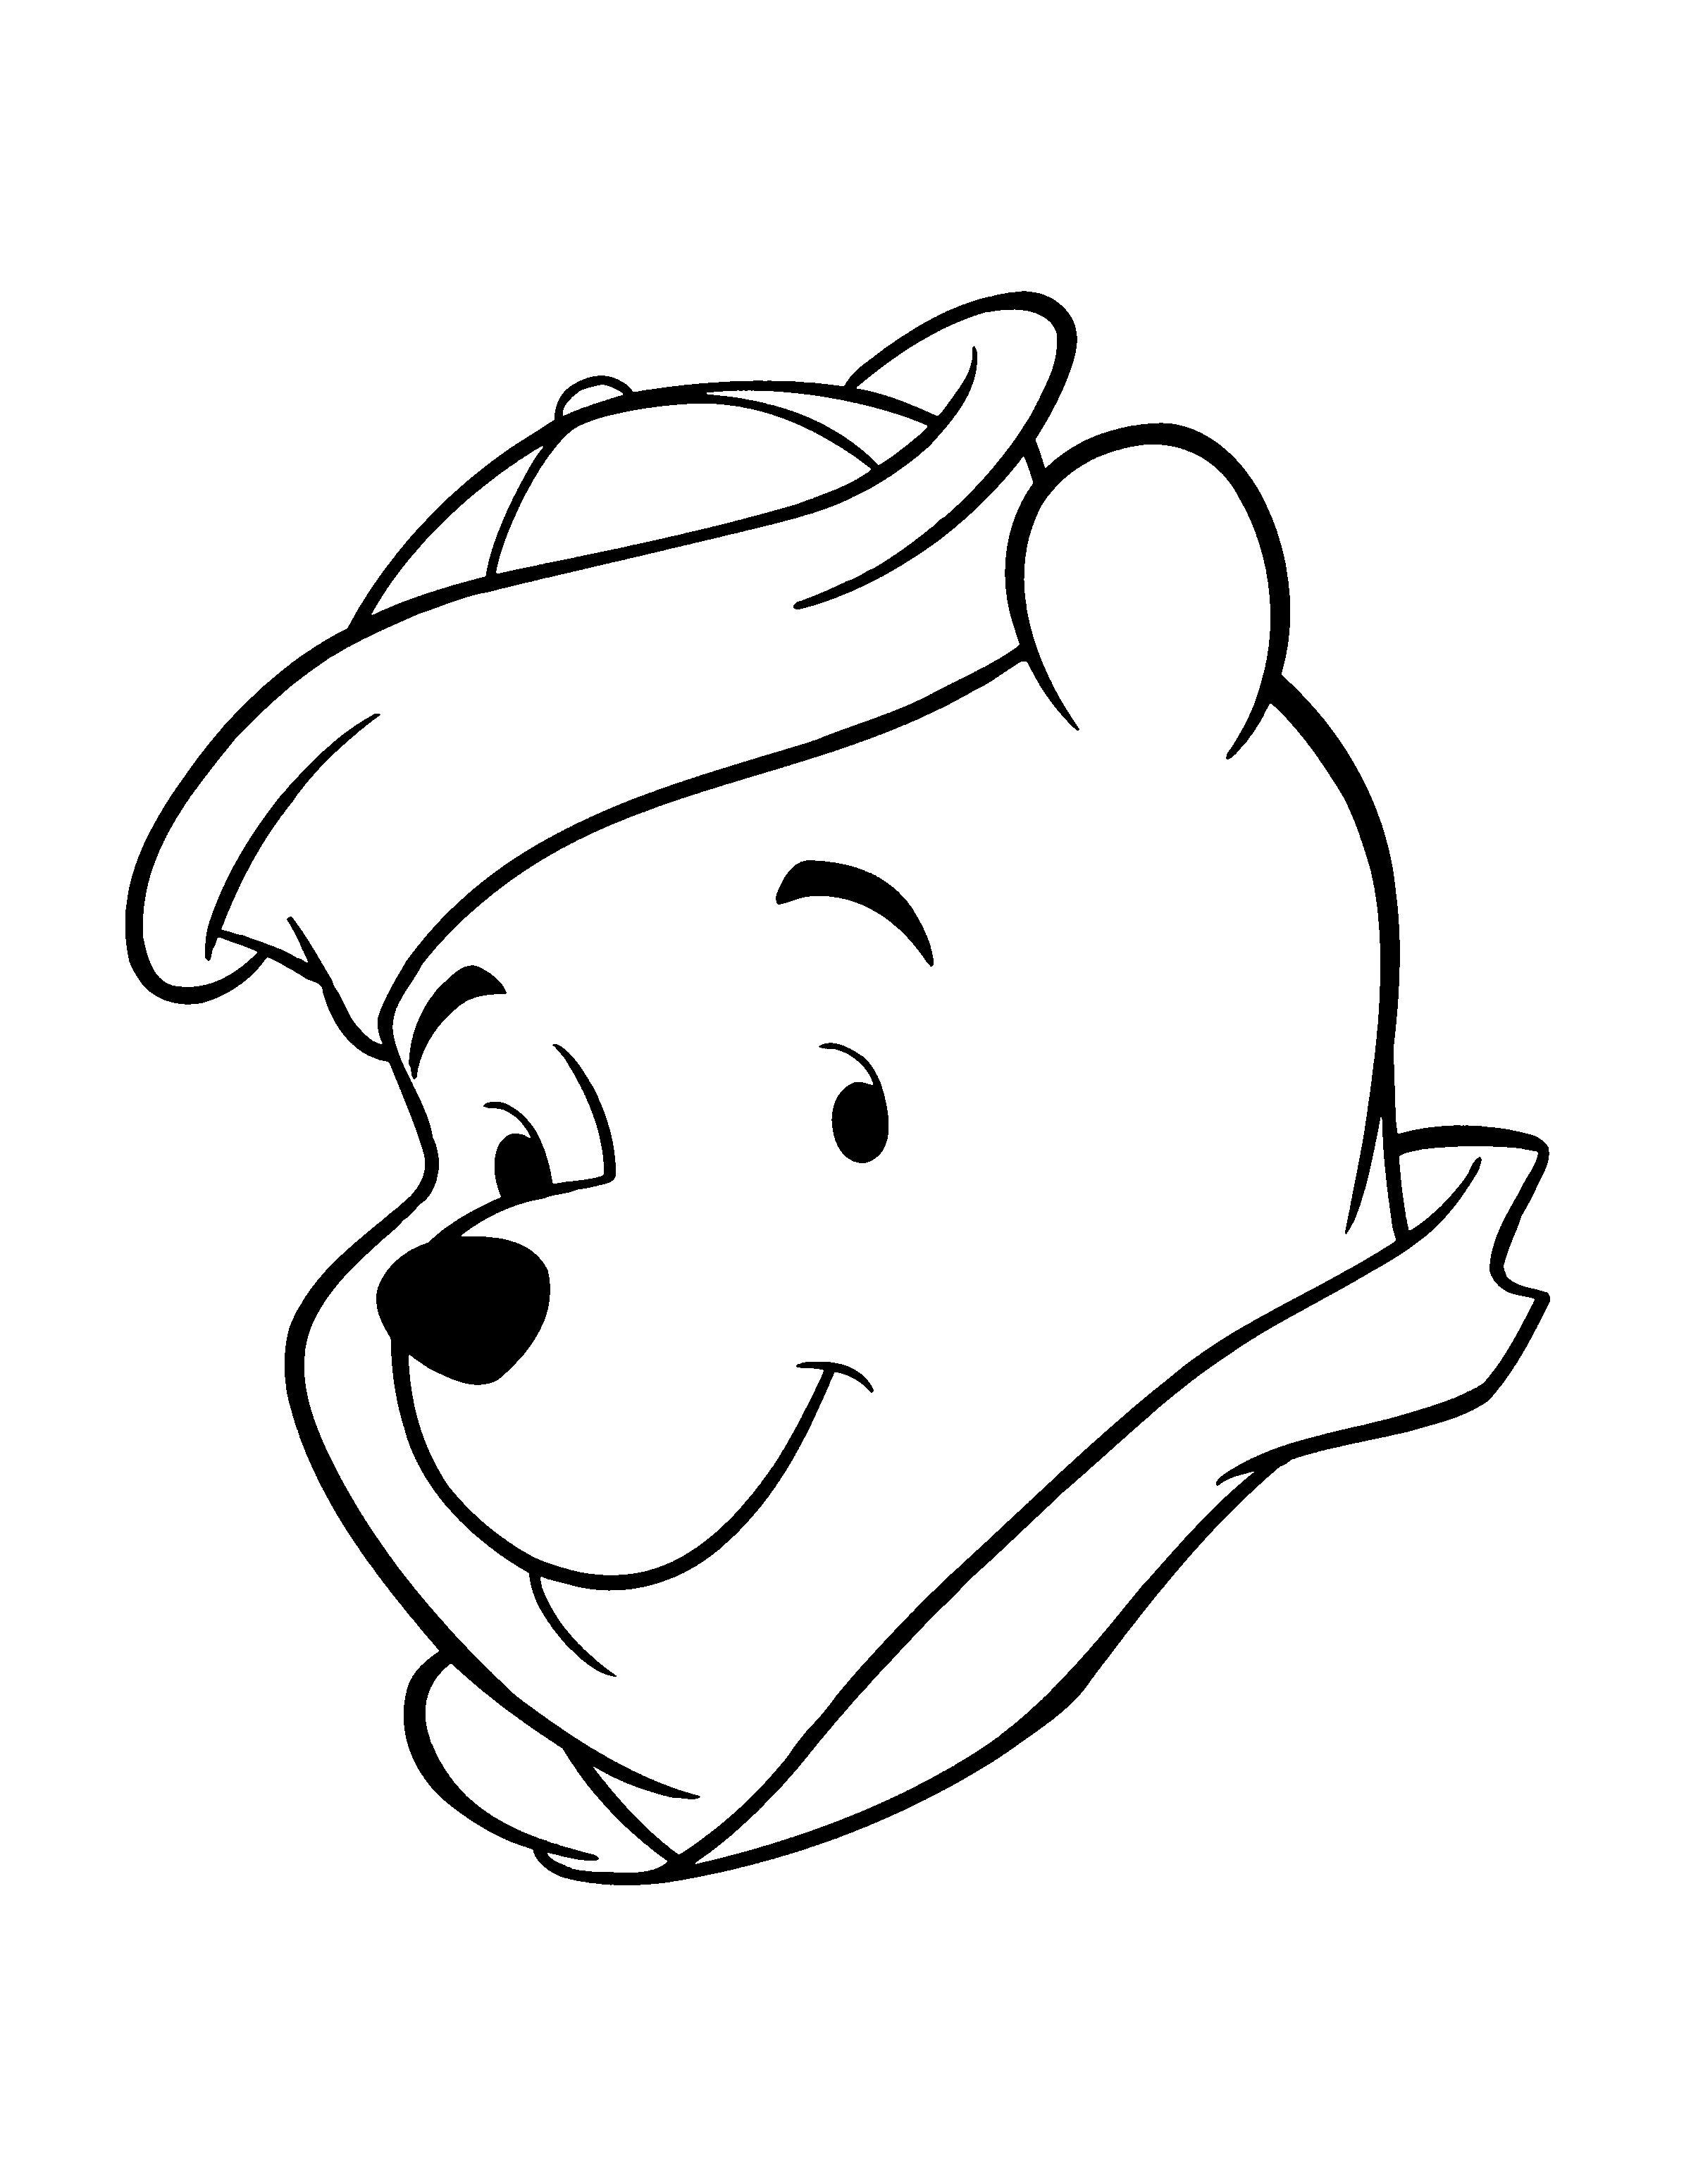 Winnie the pooh Coloring Pages